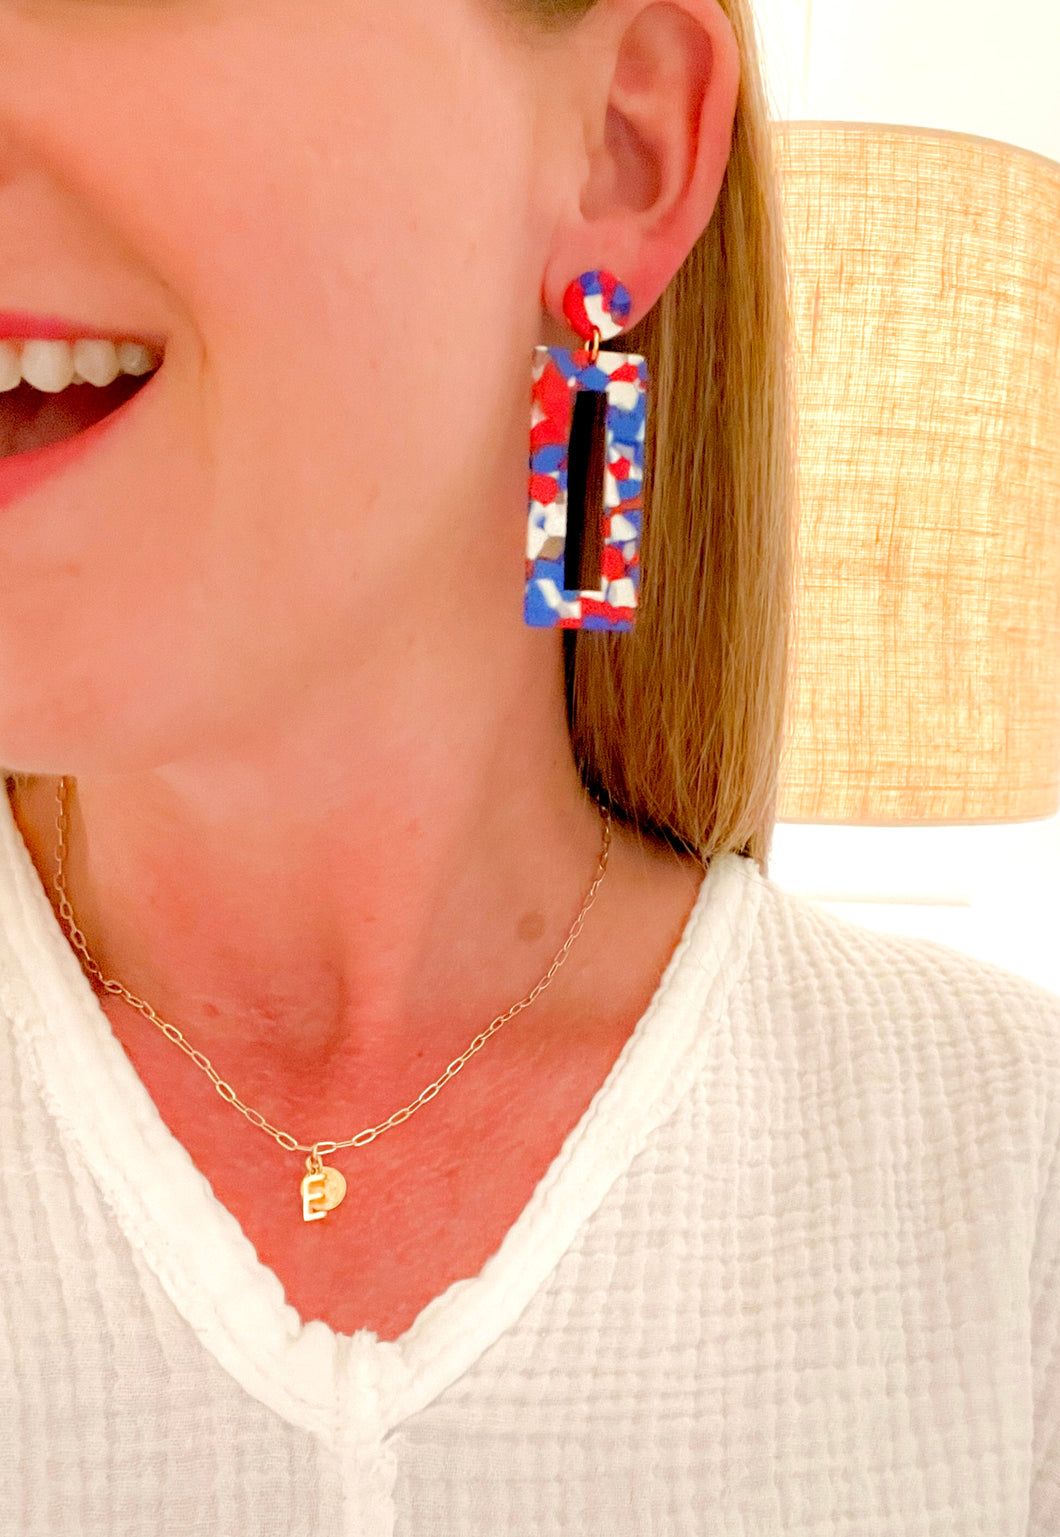 The Red, White & Blue Rectangle Drop Earrings